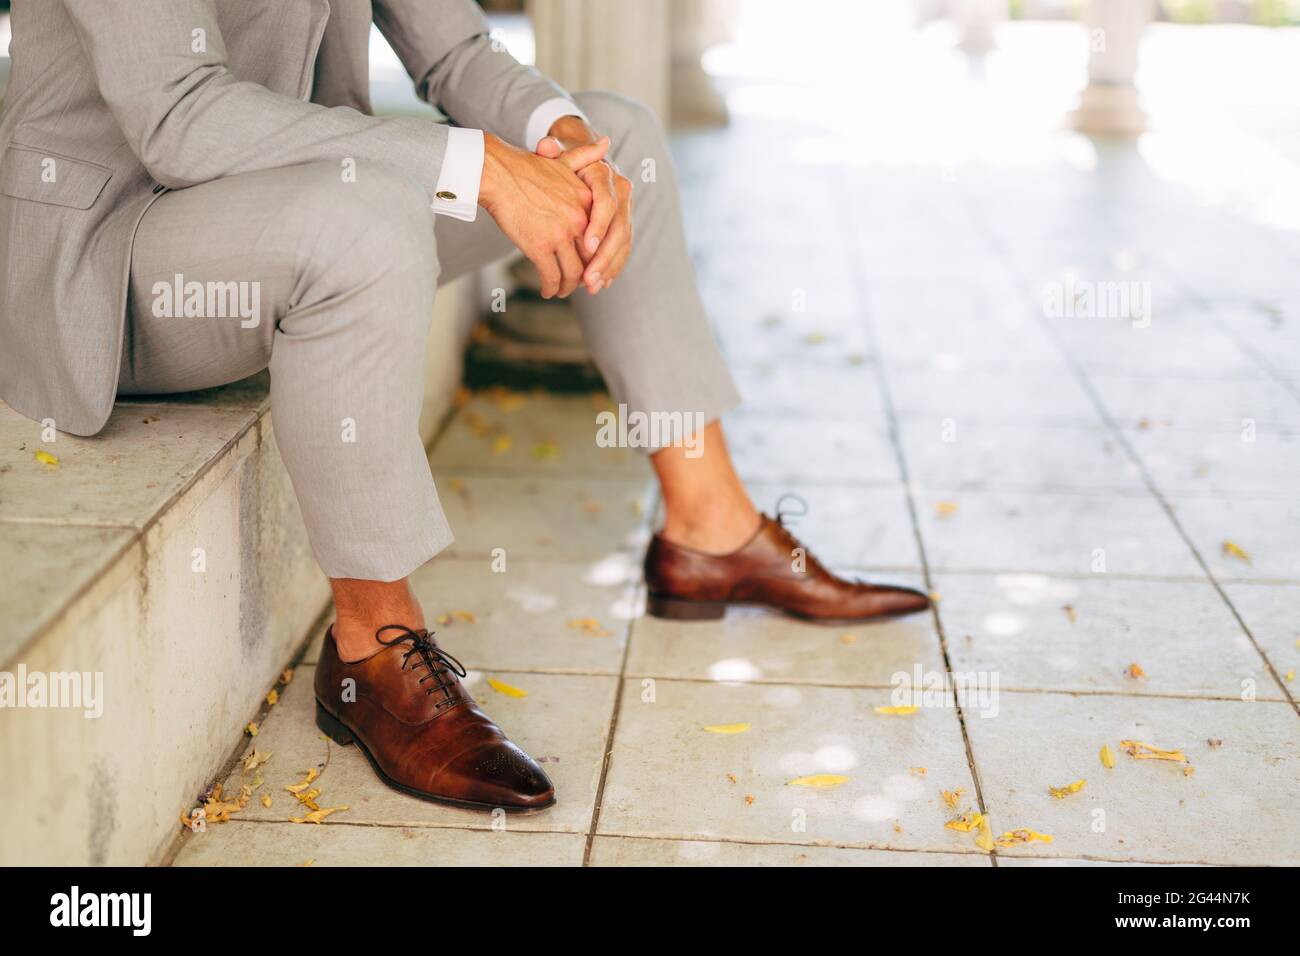 Top 10 Shoes To Wear With A Suit - 7Mile Shoes